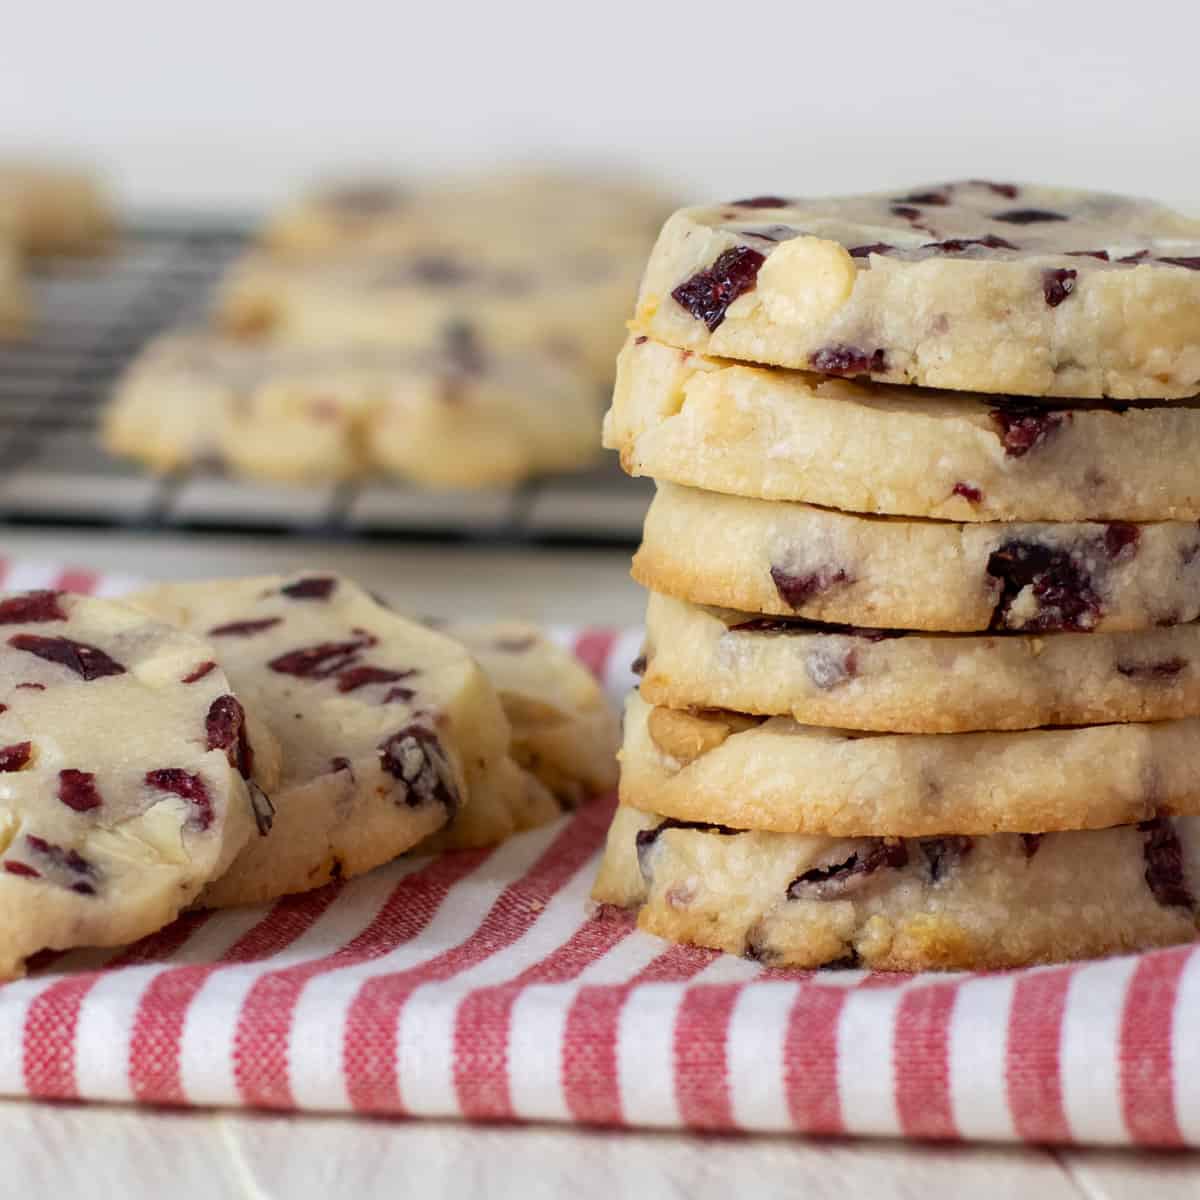 A close up picture of a stack of cookies.